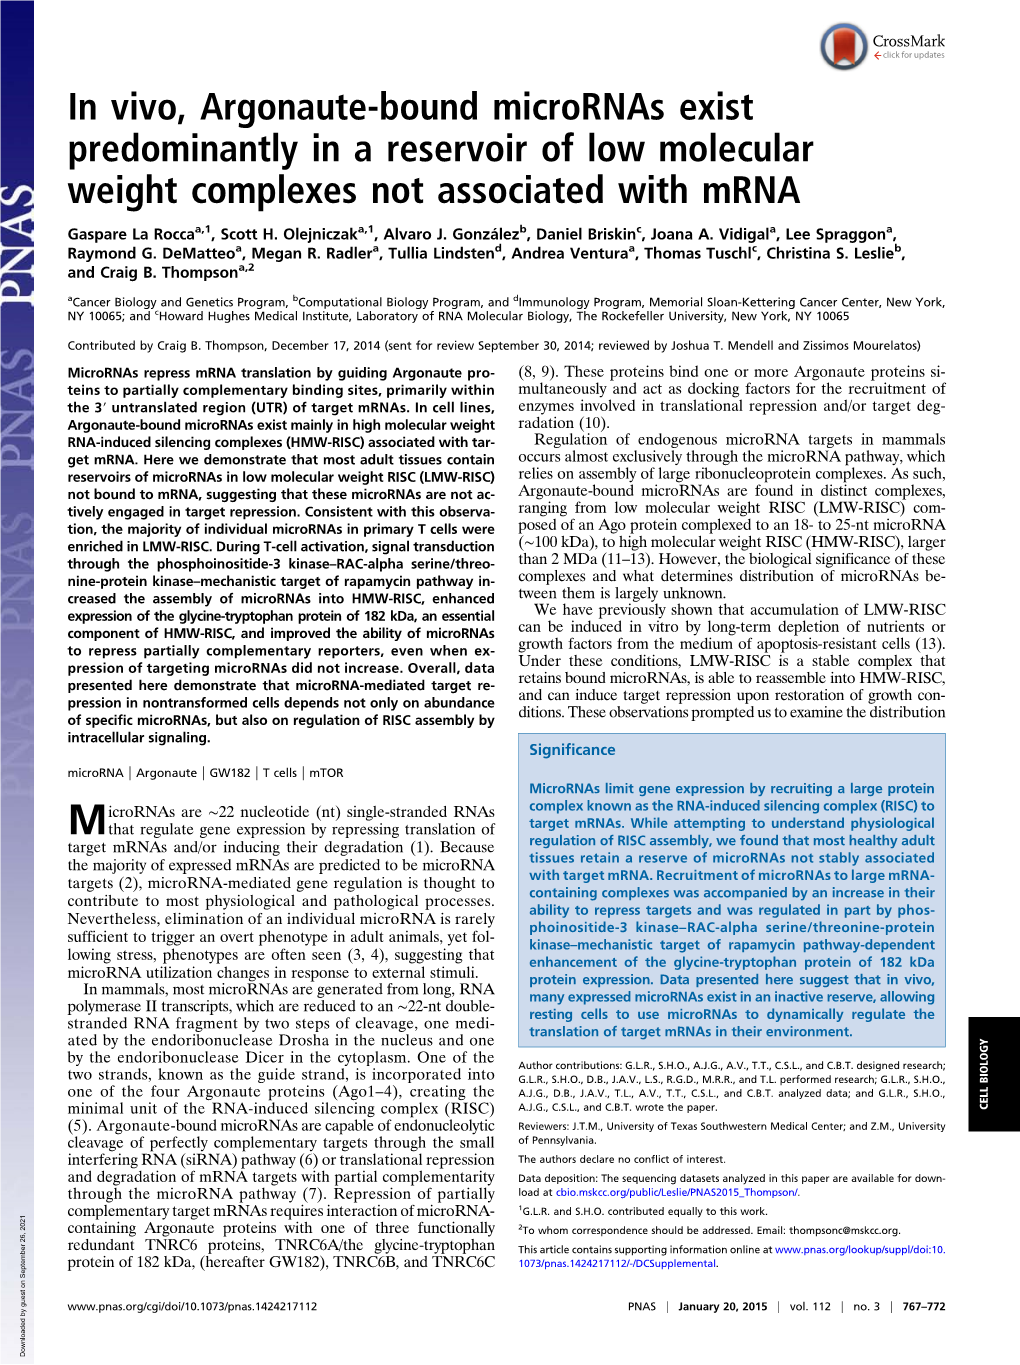 In Vivo, Argonaute-Bound Micrornas Exist Predominantly in a Reservoir of Low Molecular Weight Complexes Not Associated with Mrna